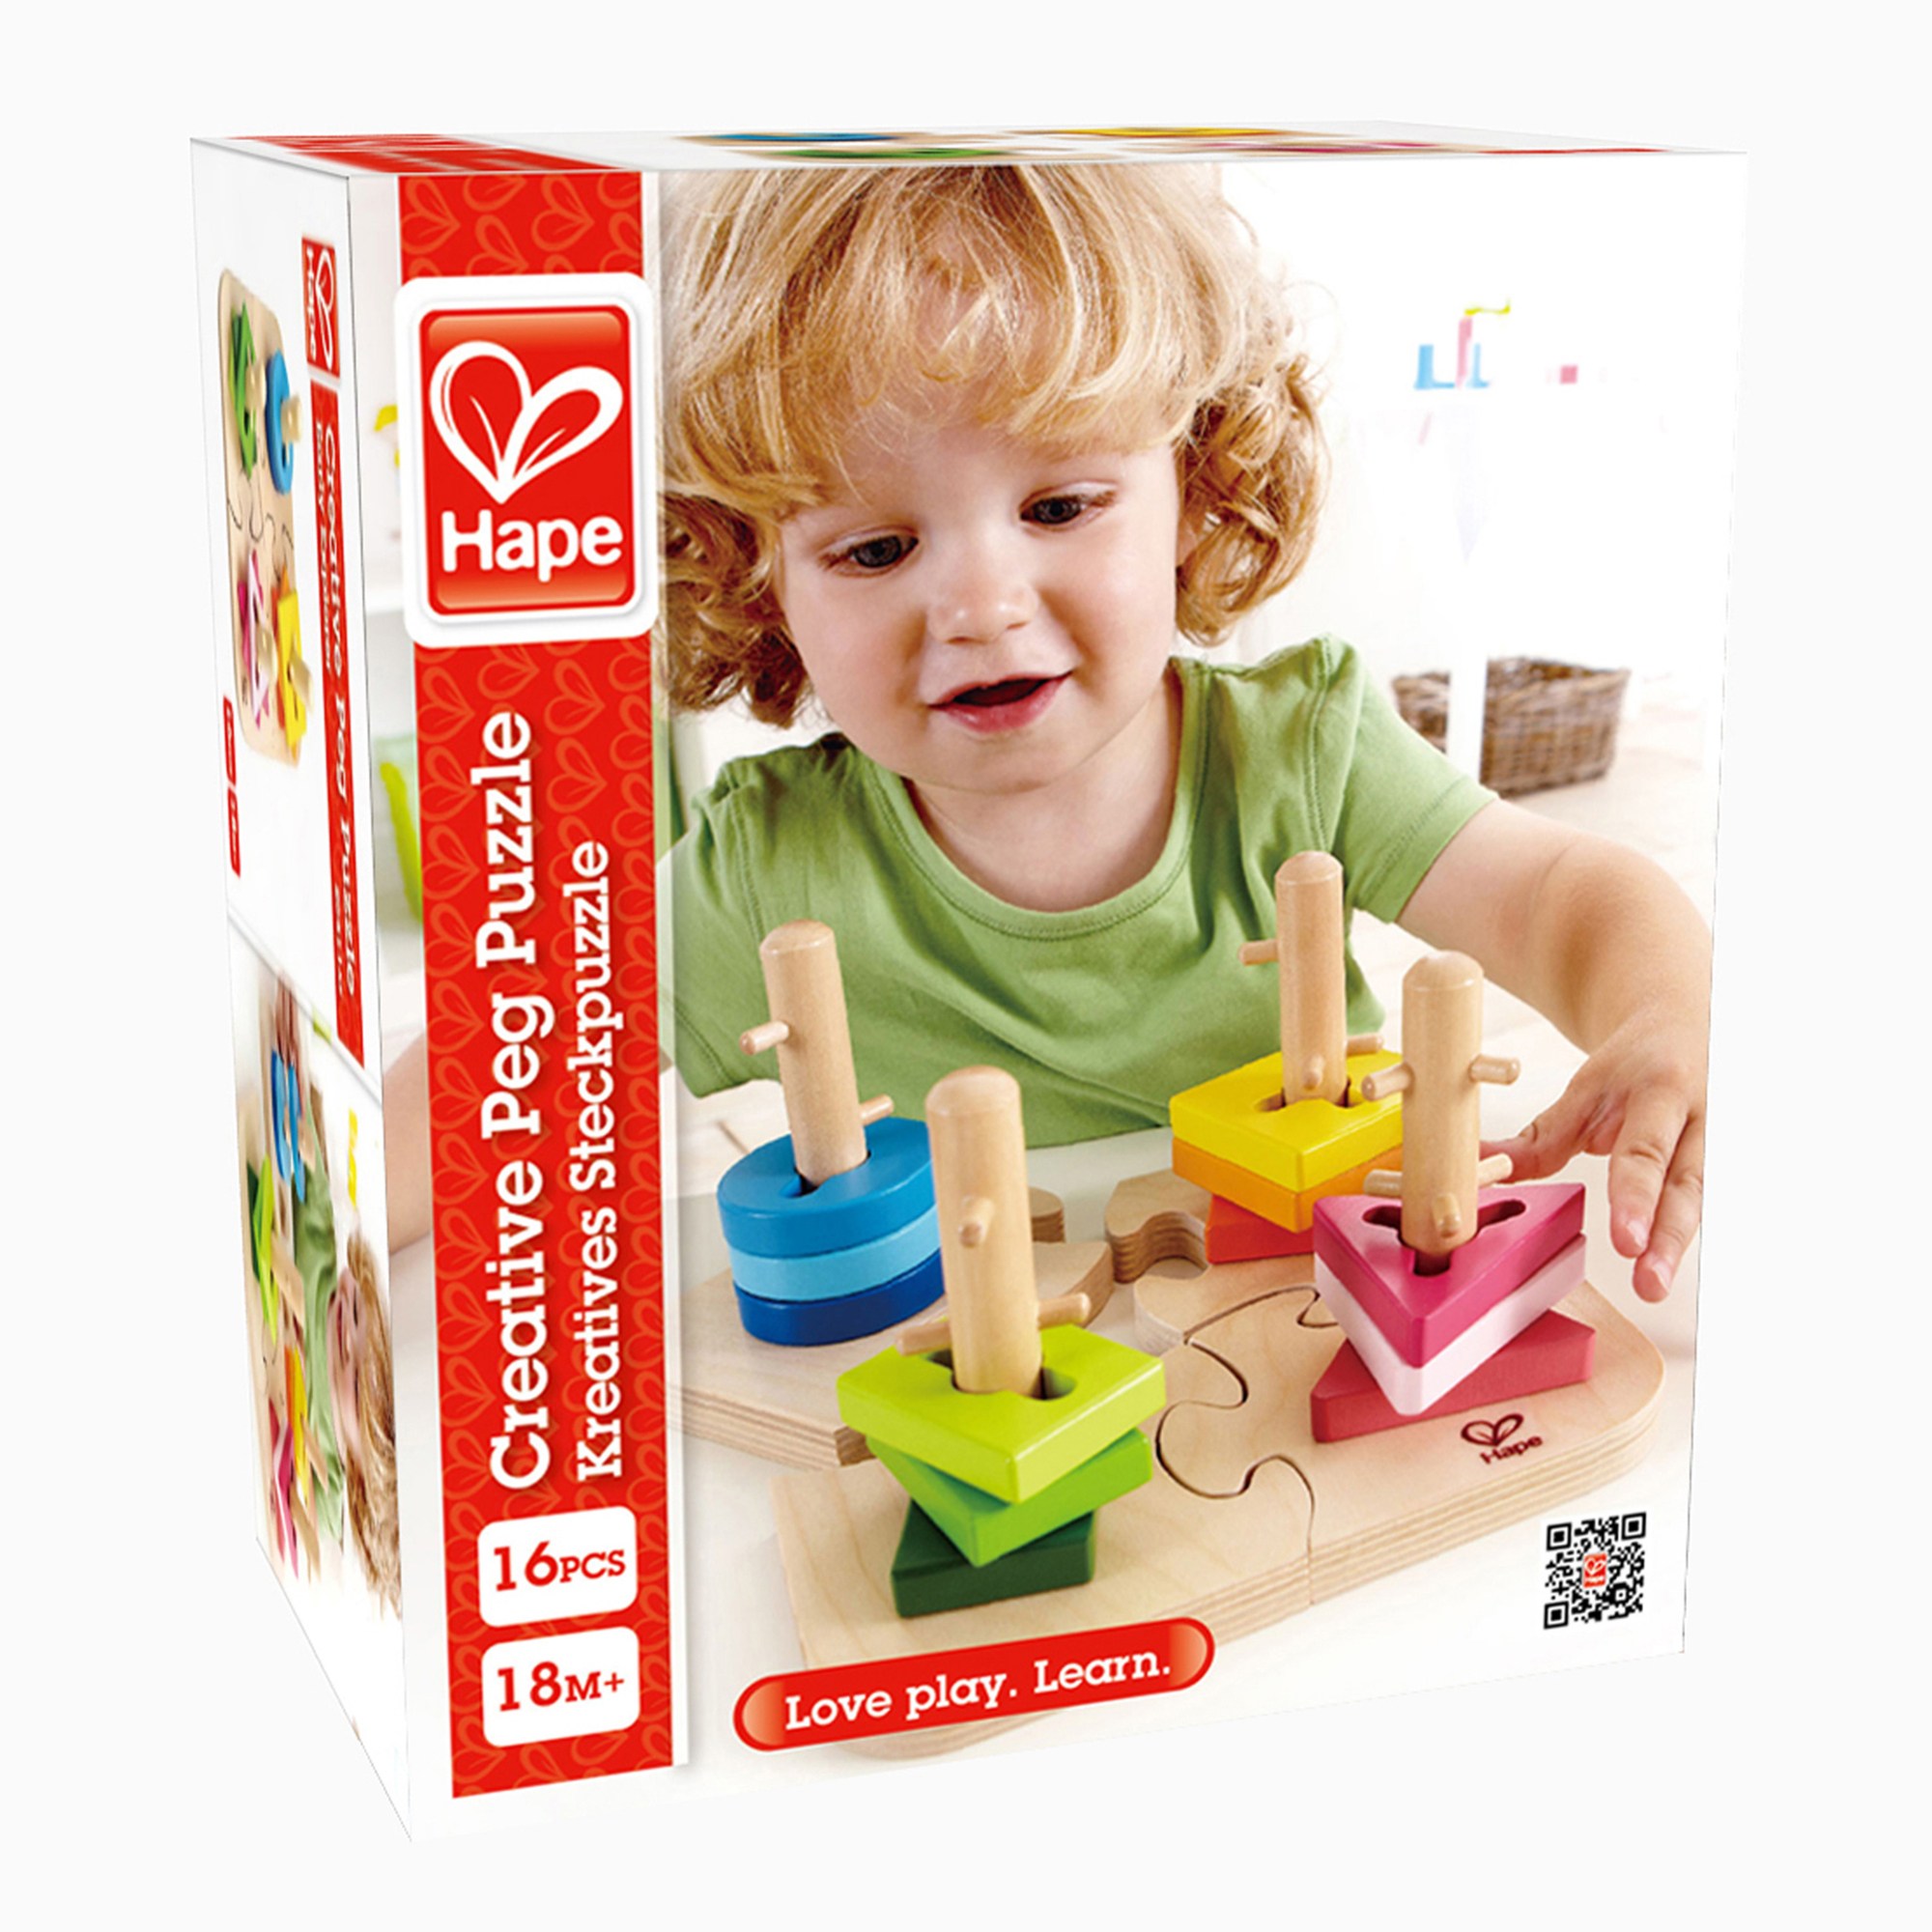 Hape Creative Peg Puzzle - 16 Pieces, Wooden Toddler Stacking Shape Puzzle Toy - image 3 of 6